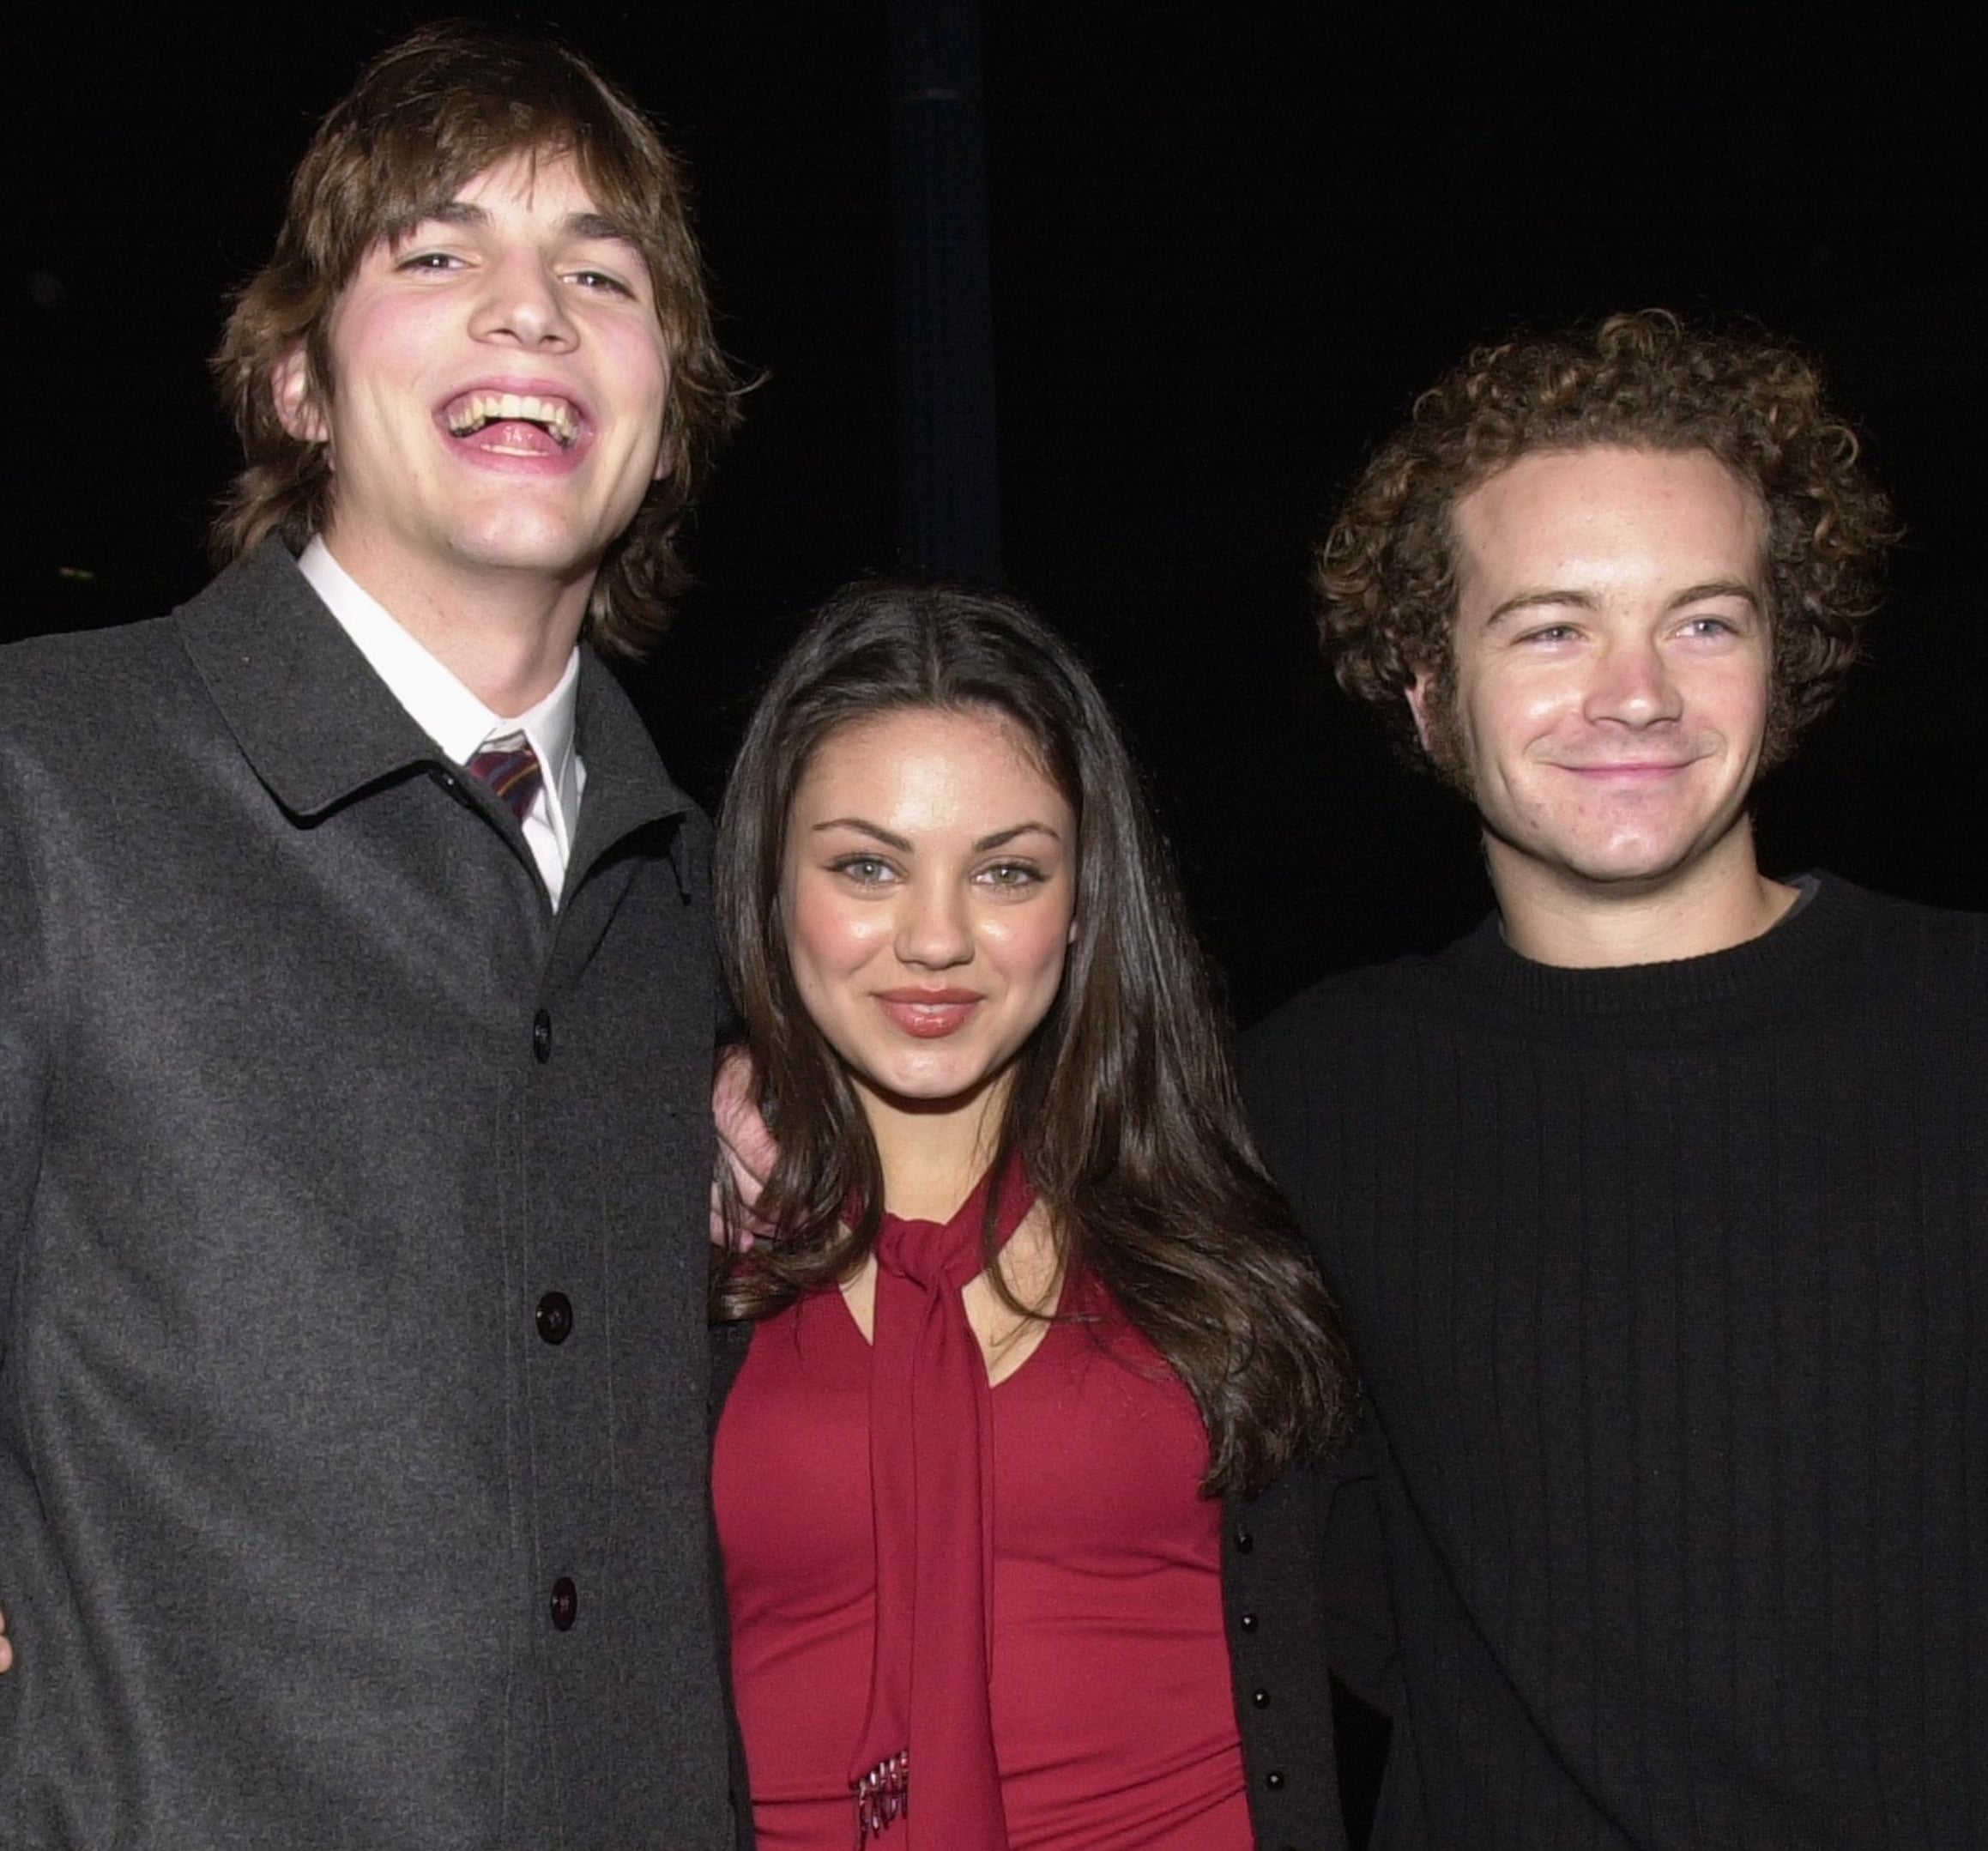 From left to right: Ashton, Mila, and Danny